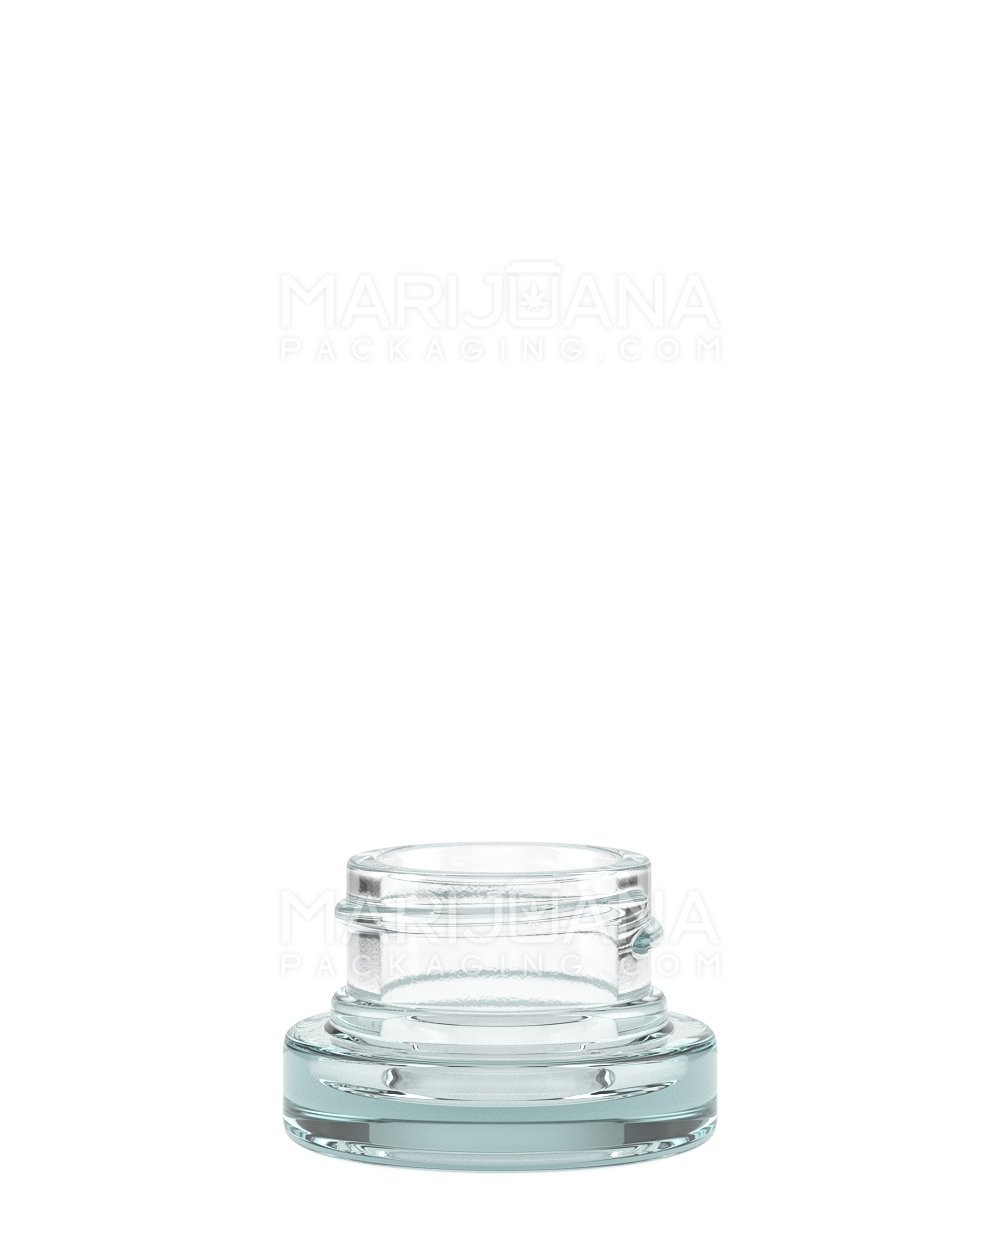 Clear Glass Concentrate Containers | 28mm - 5mL - 504 Count - 1